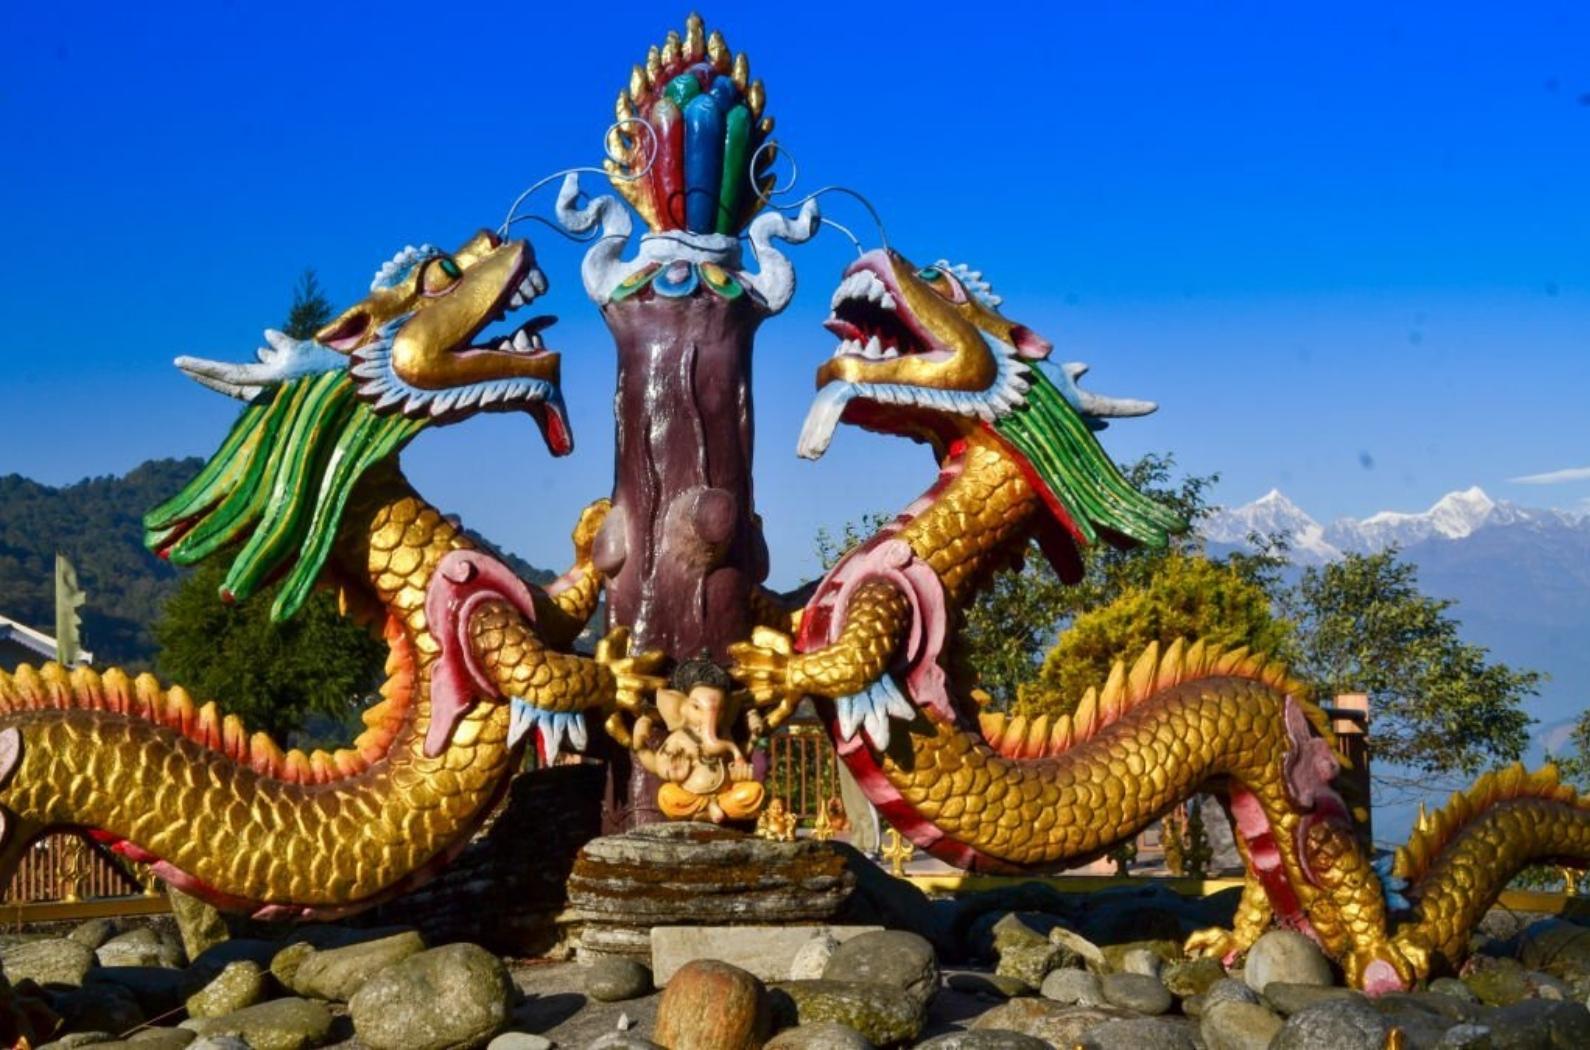 The statue of these beautiful dragons were made there to make the place more attractive for the tourists. The architecture is very colorful and enhanced the beauty of already famous tourist spot.